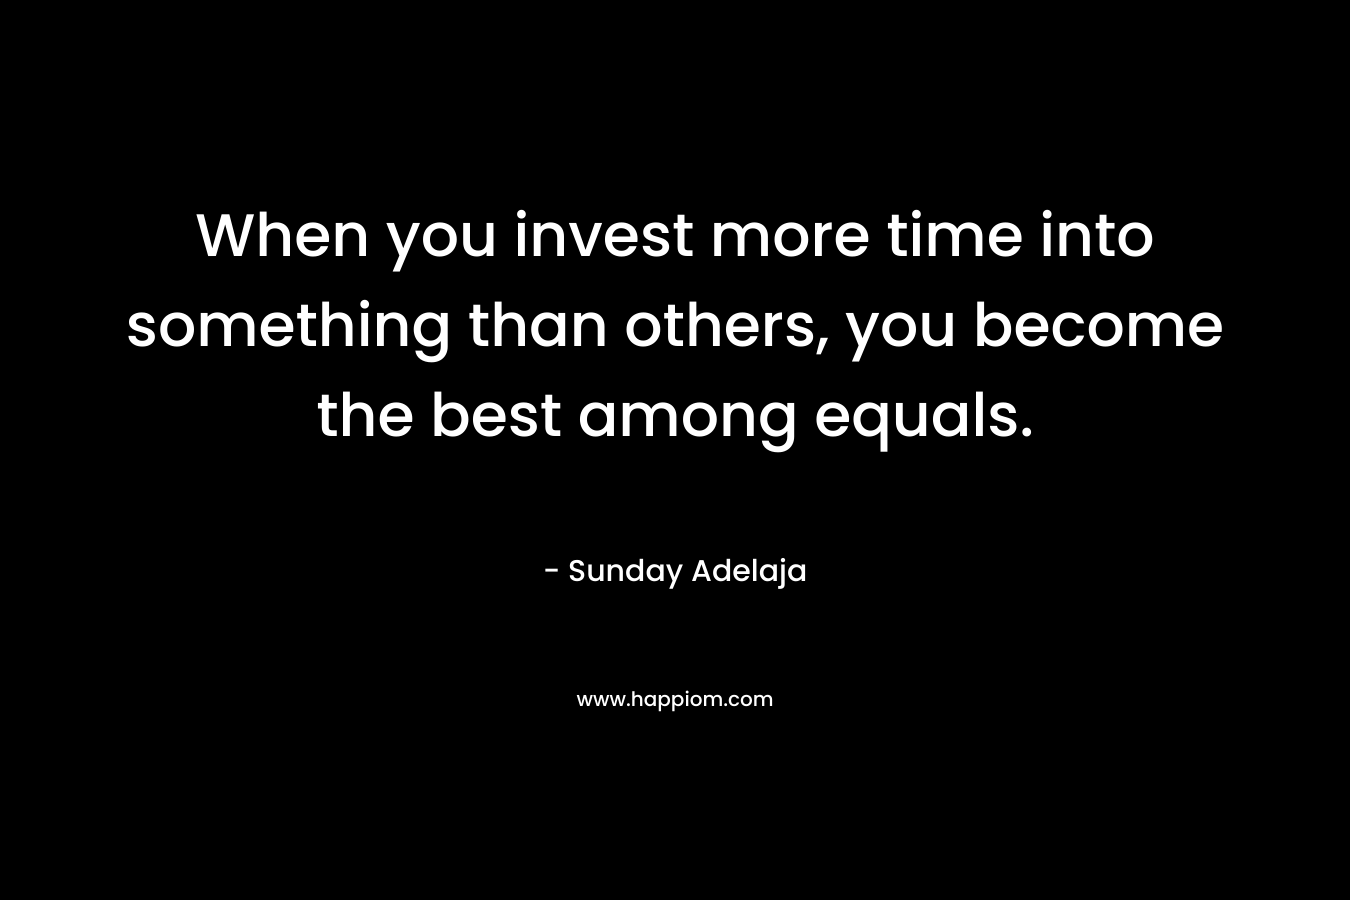 When you invest more time into something than others, you become the best among equals.